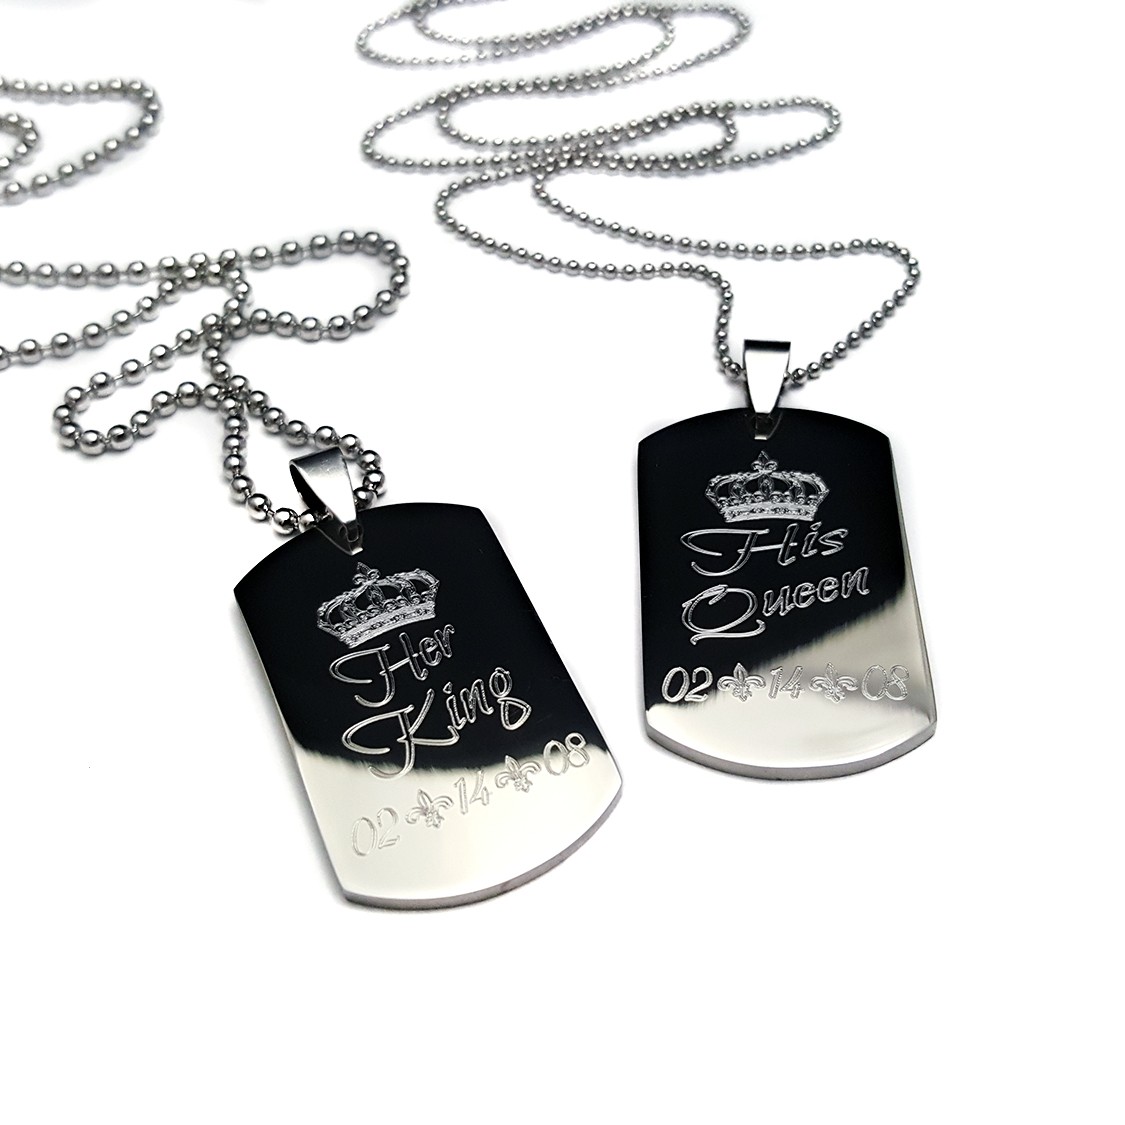 her king his queen dog tags